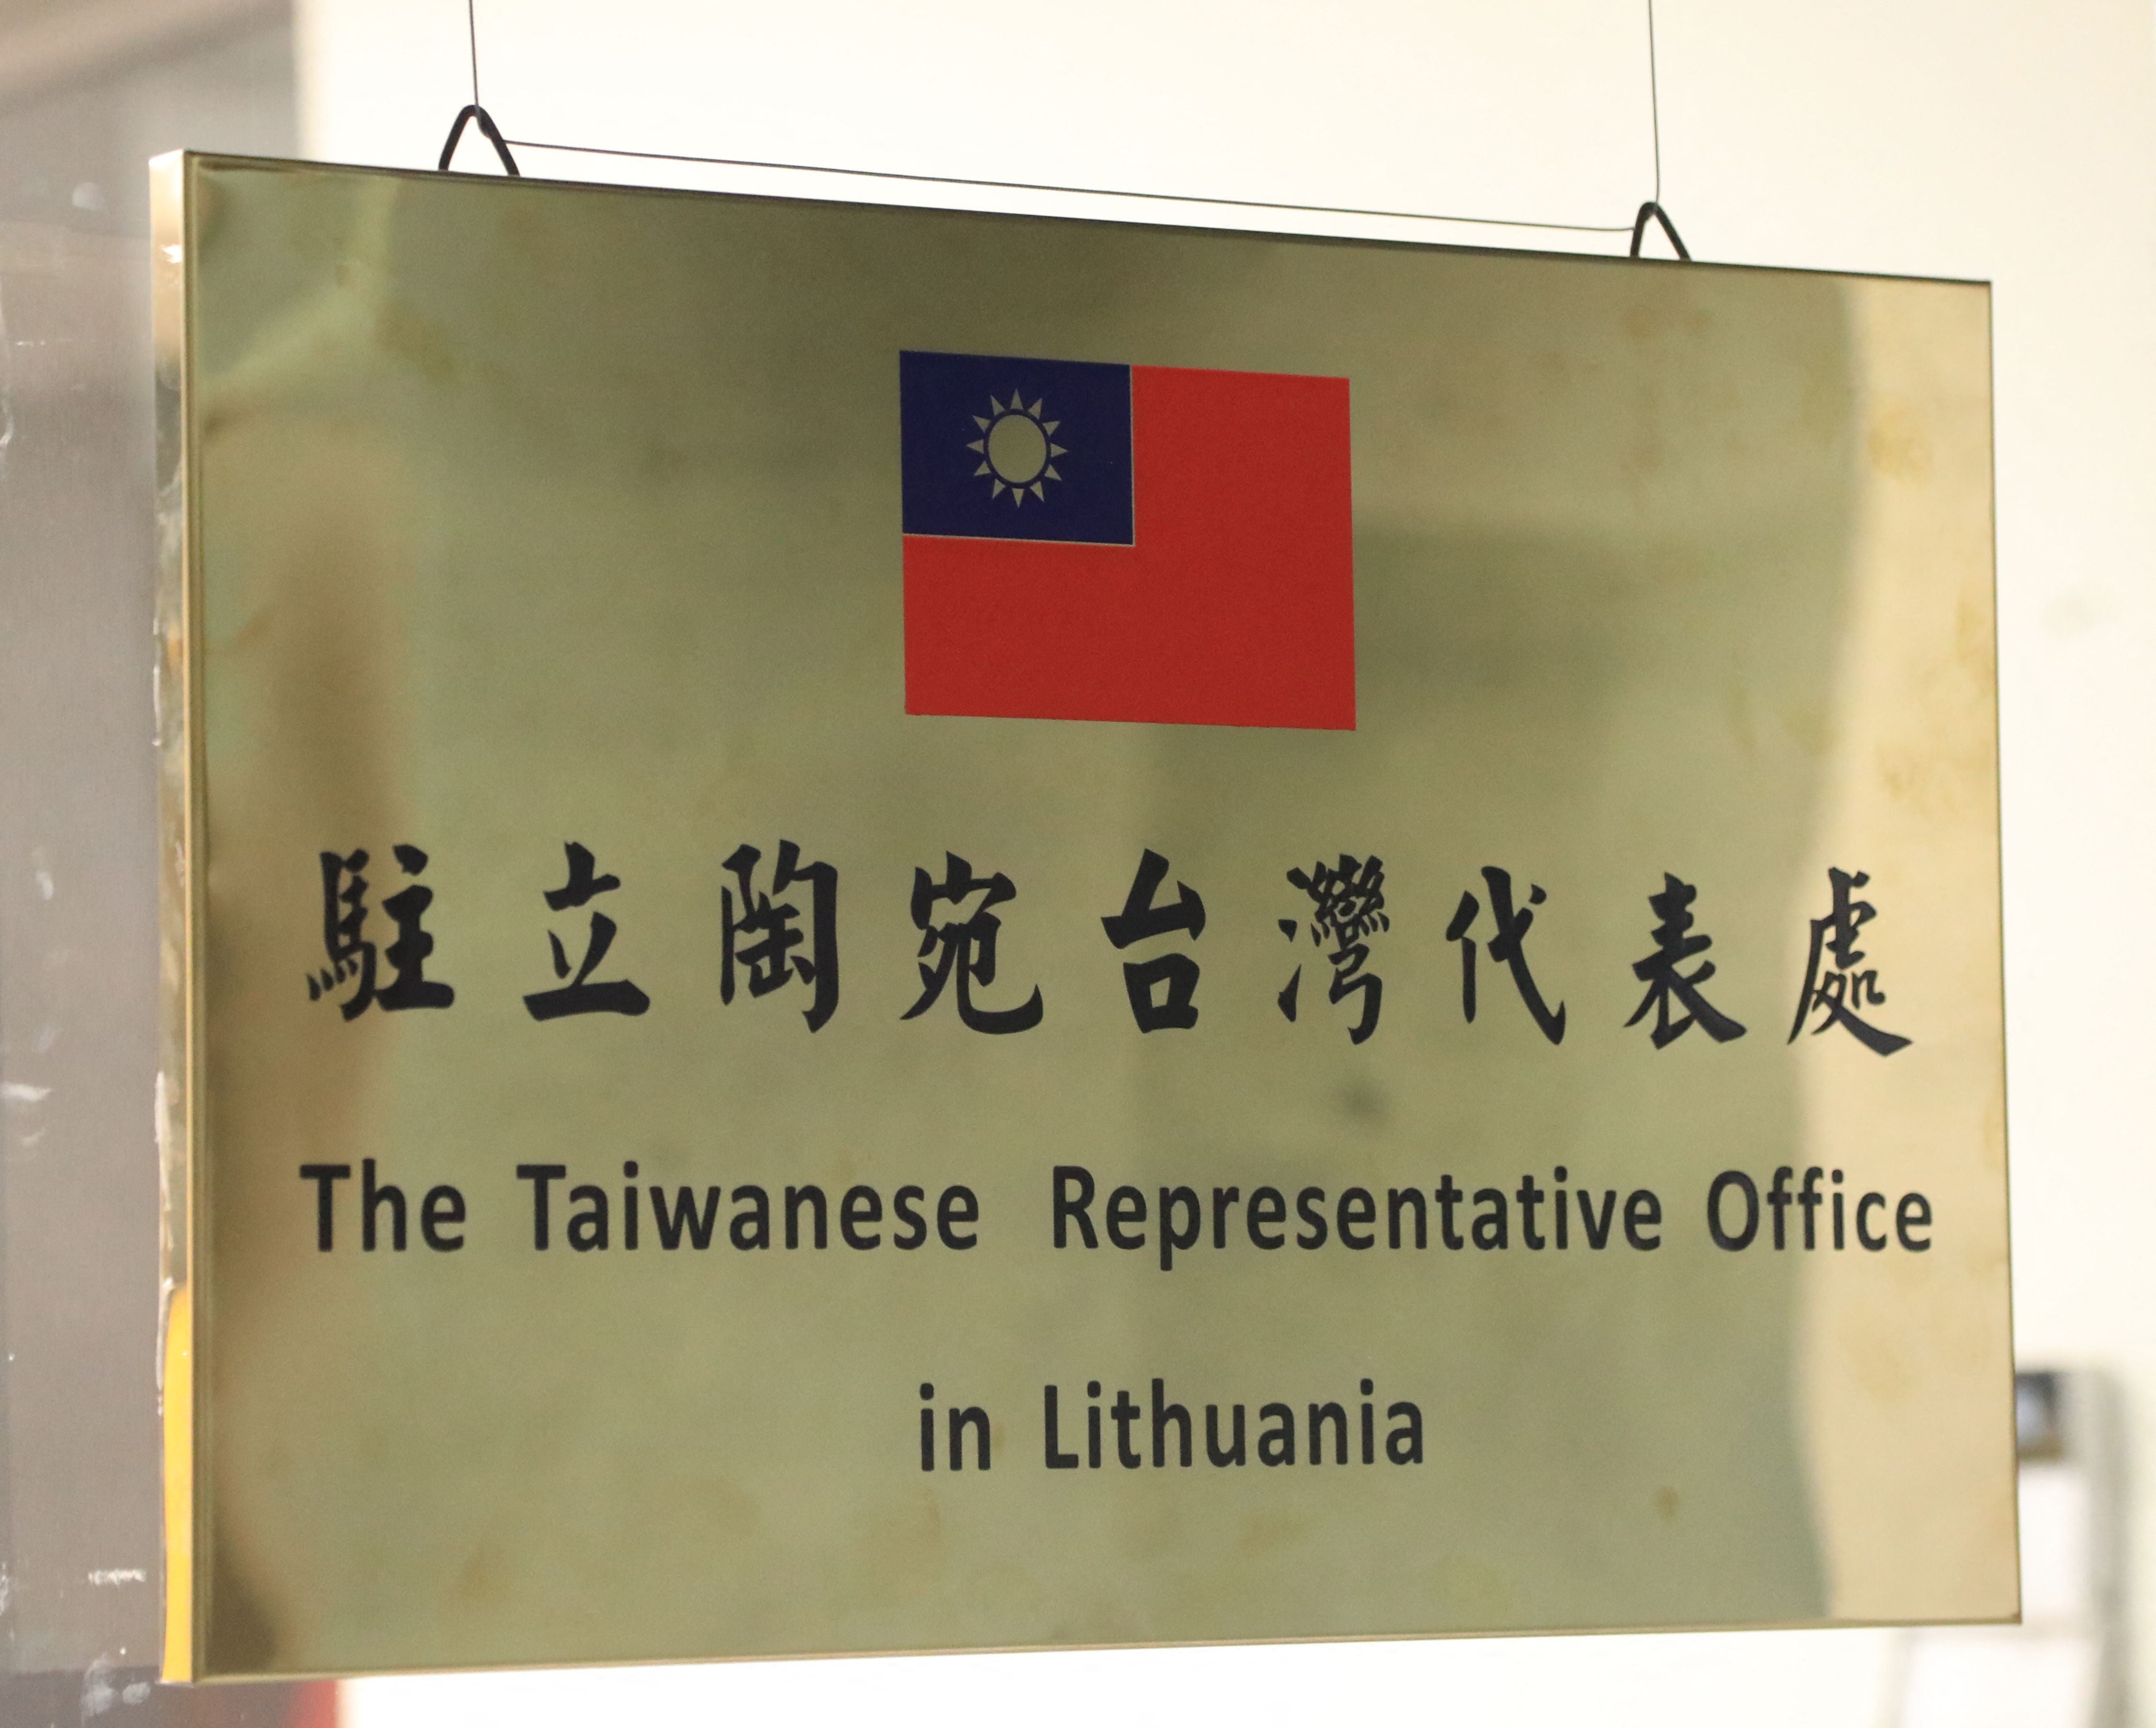 File image: Picture taken on 18 November 2021 shows the name plaque at the Taiwanese Representative Office in Lithuania, Vilnius